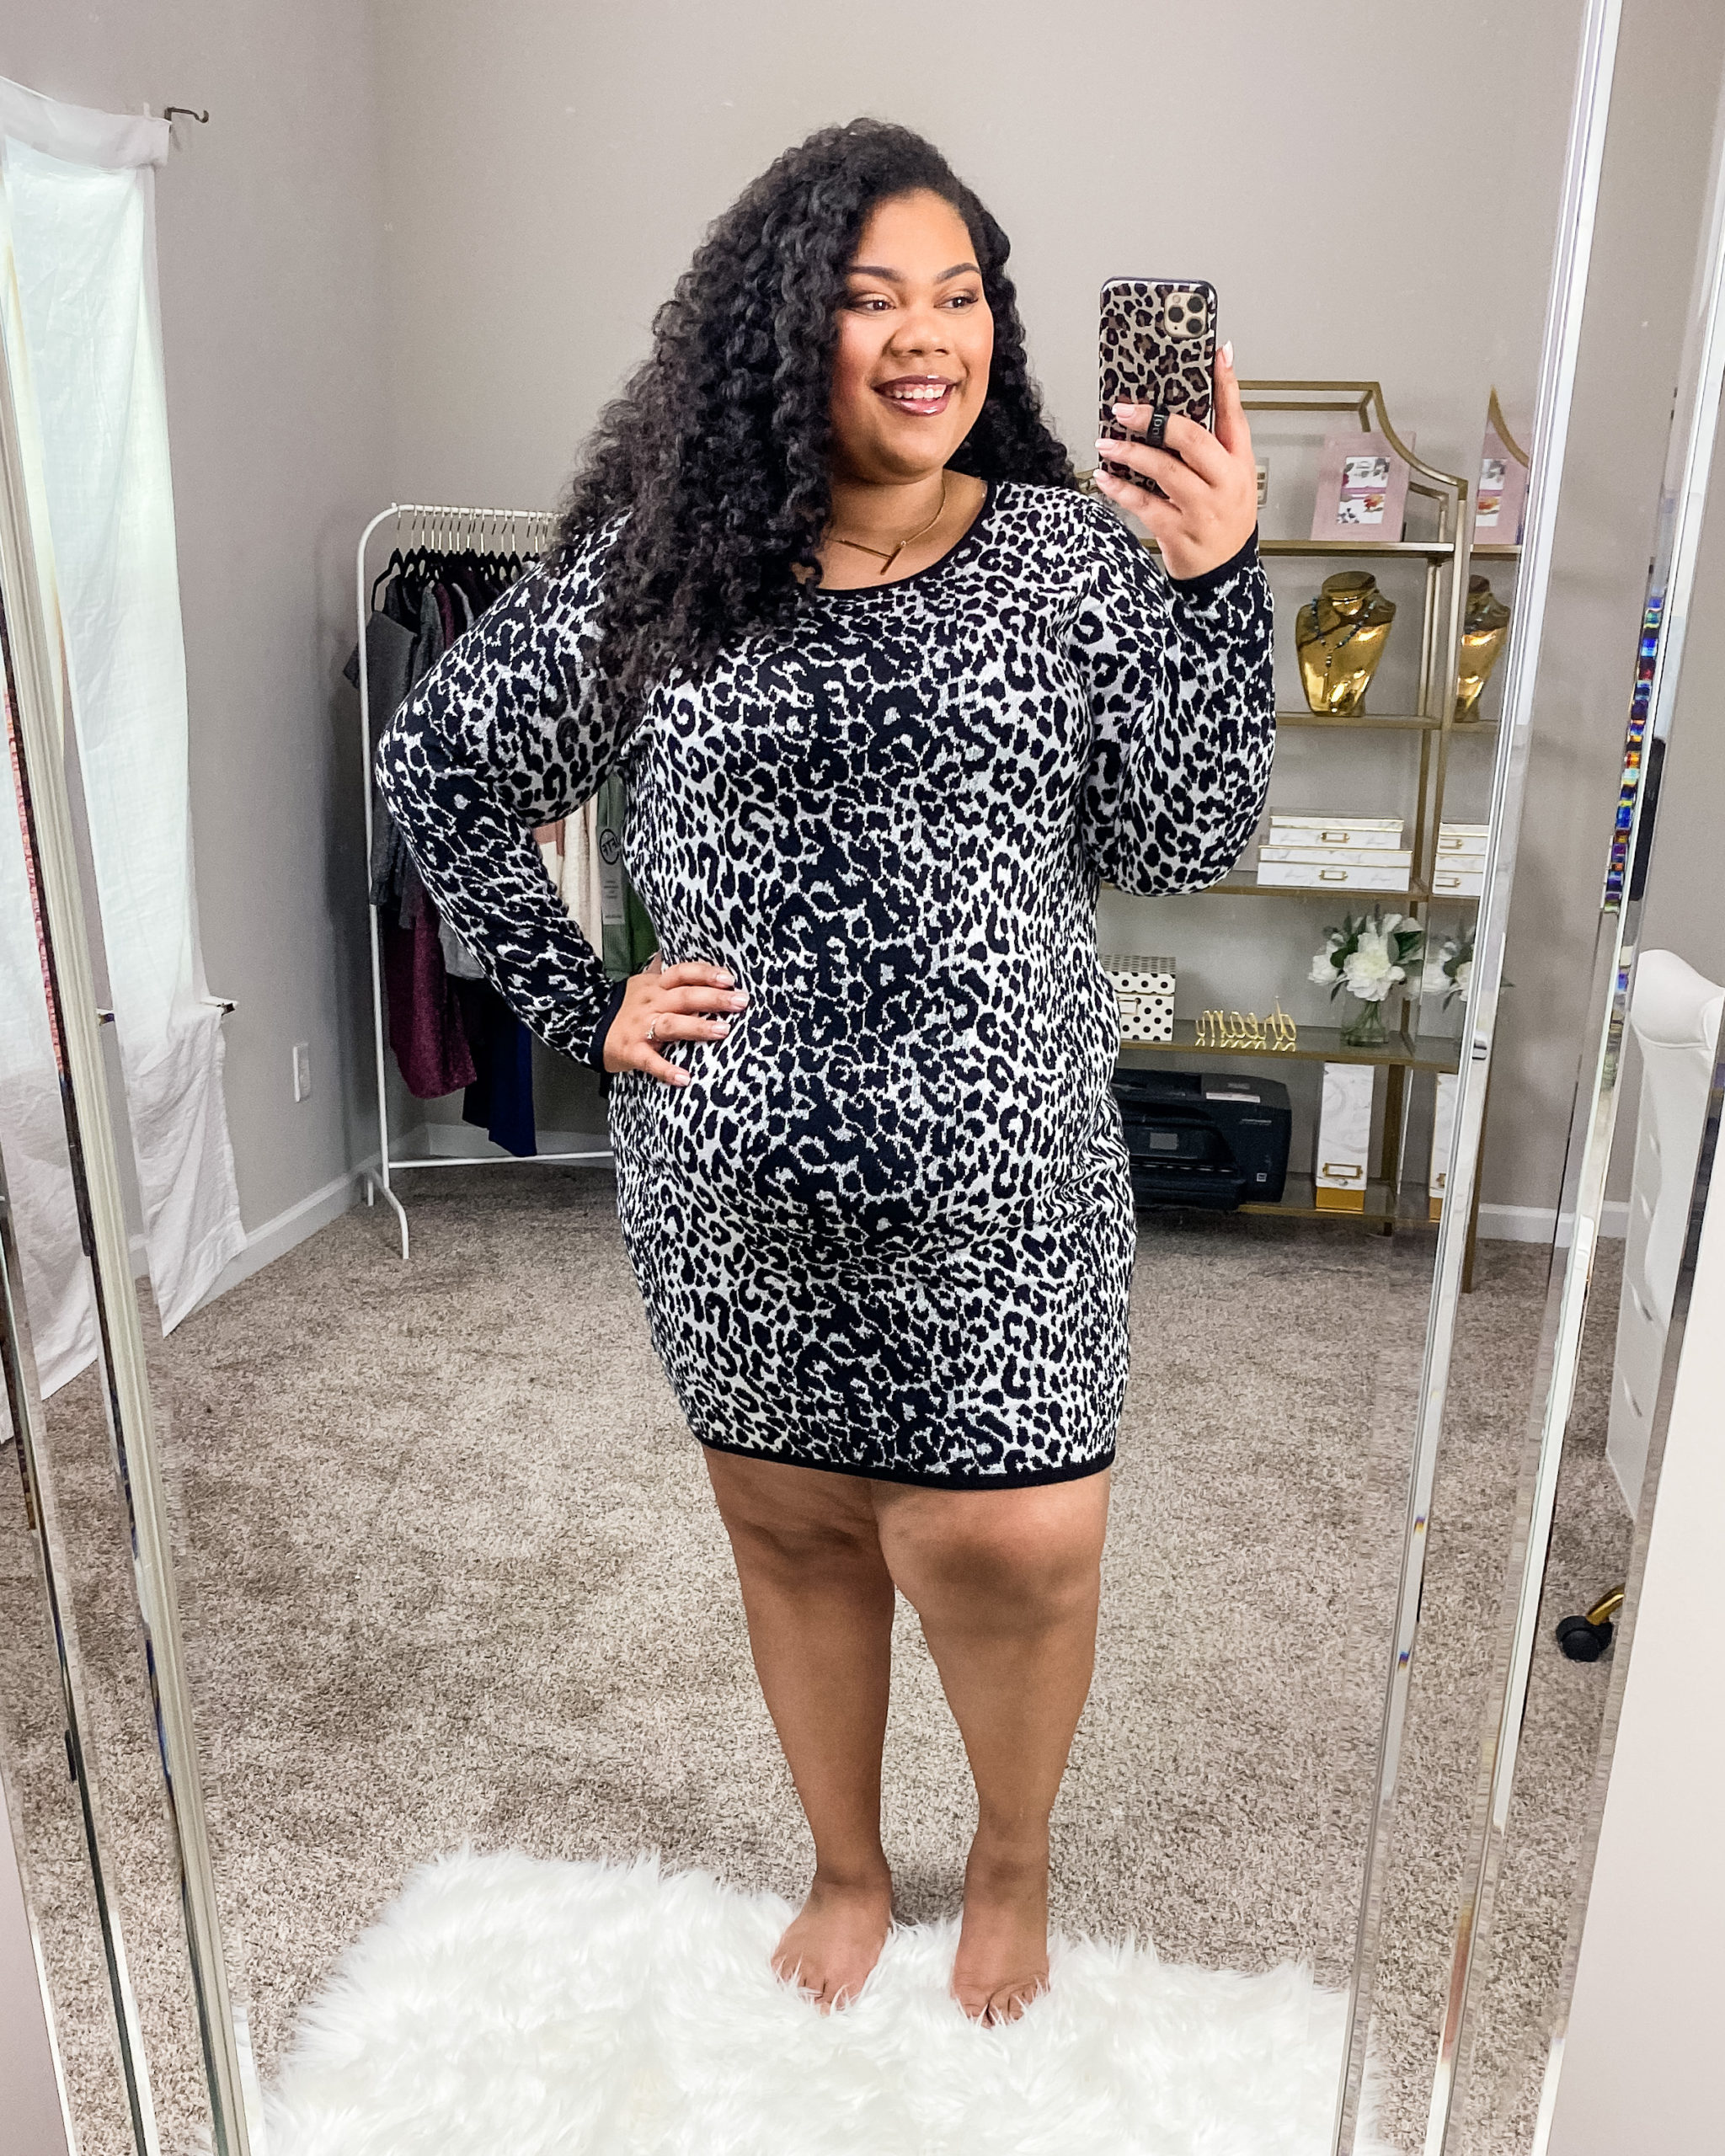 Plus Size Fashion To Figure Try On Haul | www.tamelad.com #fashiontofigure #fashiontofiguretryonhaul #plussizefashion #plussizetryonhaul #plussizeoutfit